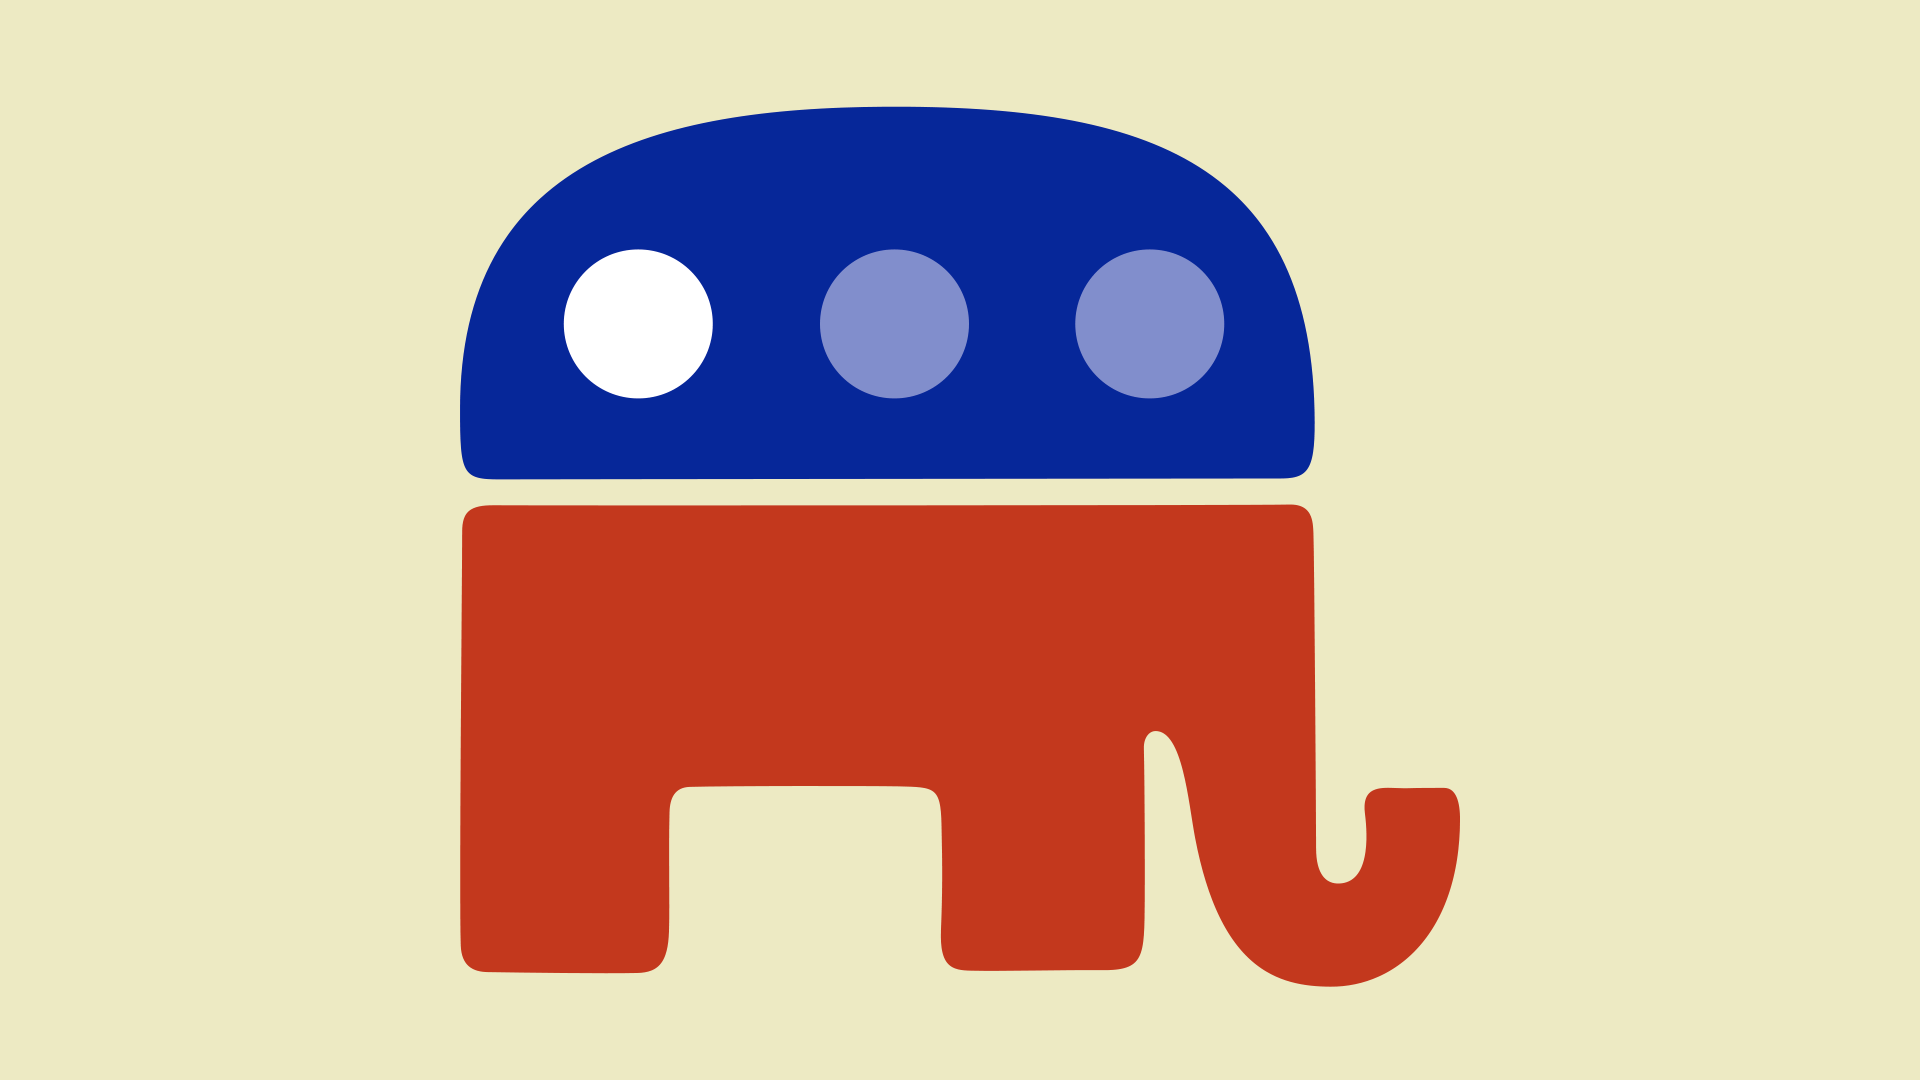 Illustration of the GOP logo with animated typing ellipses, as if the elephant is thinking.